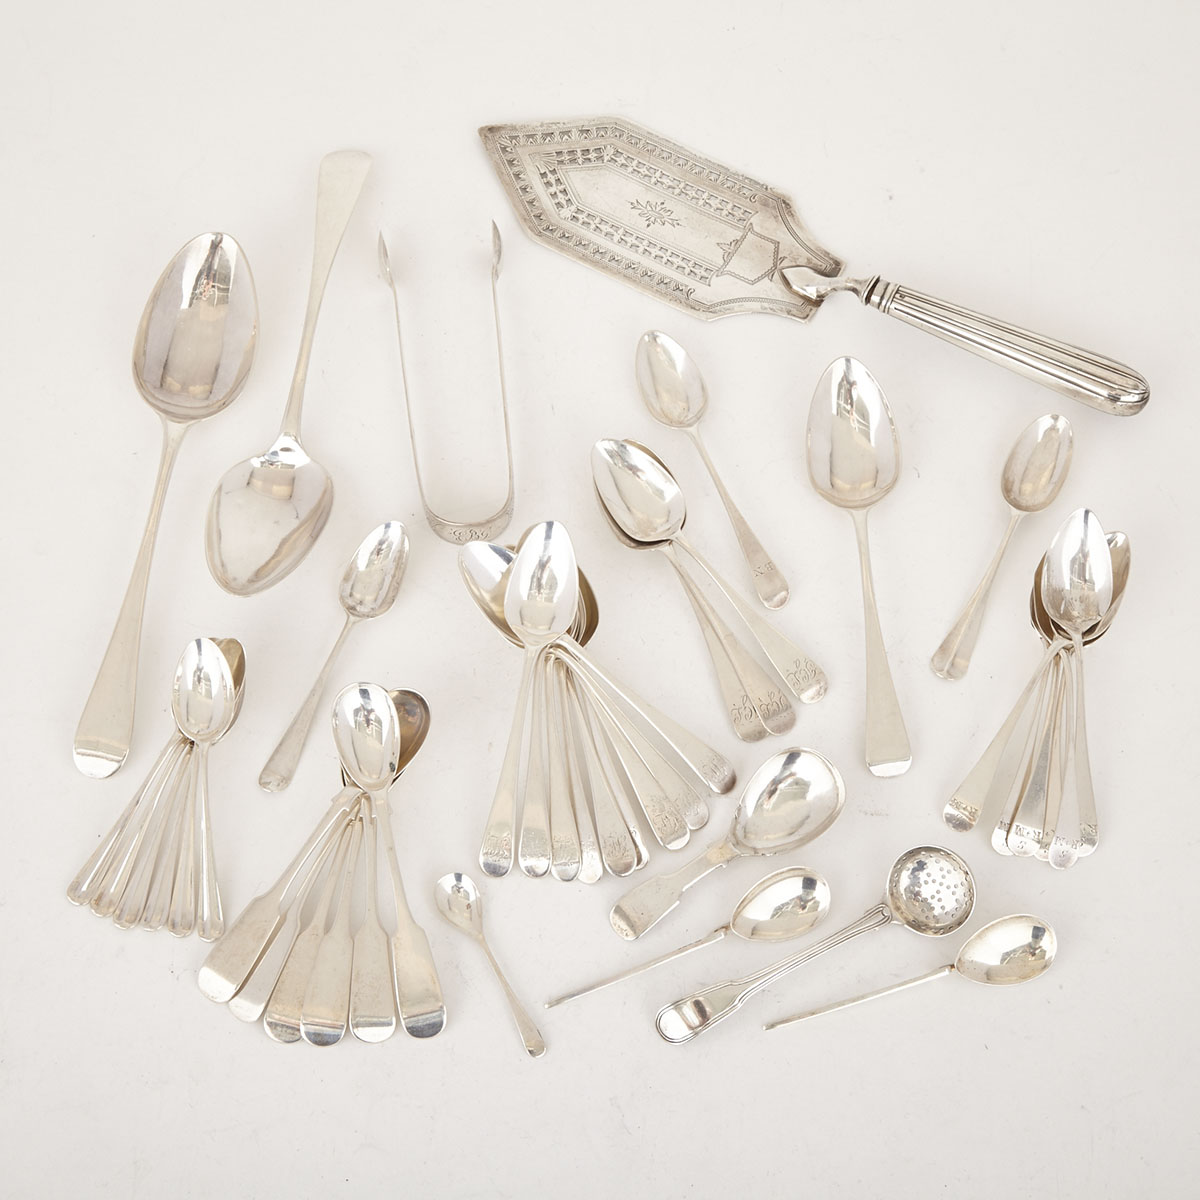 Grouped Lot of Georgian and Later English and Scottish Silver Flatware, 18th/19th/20th century